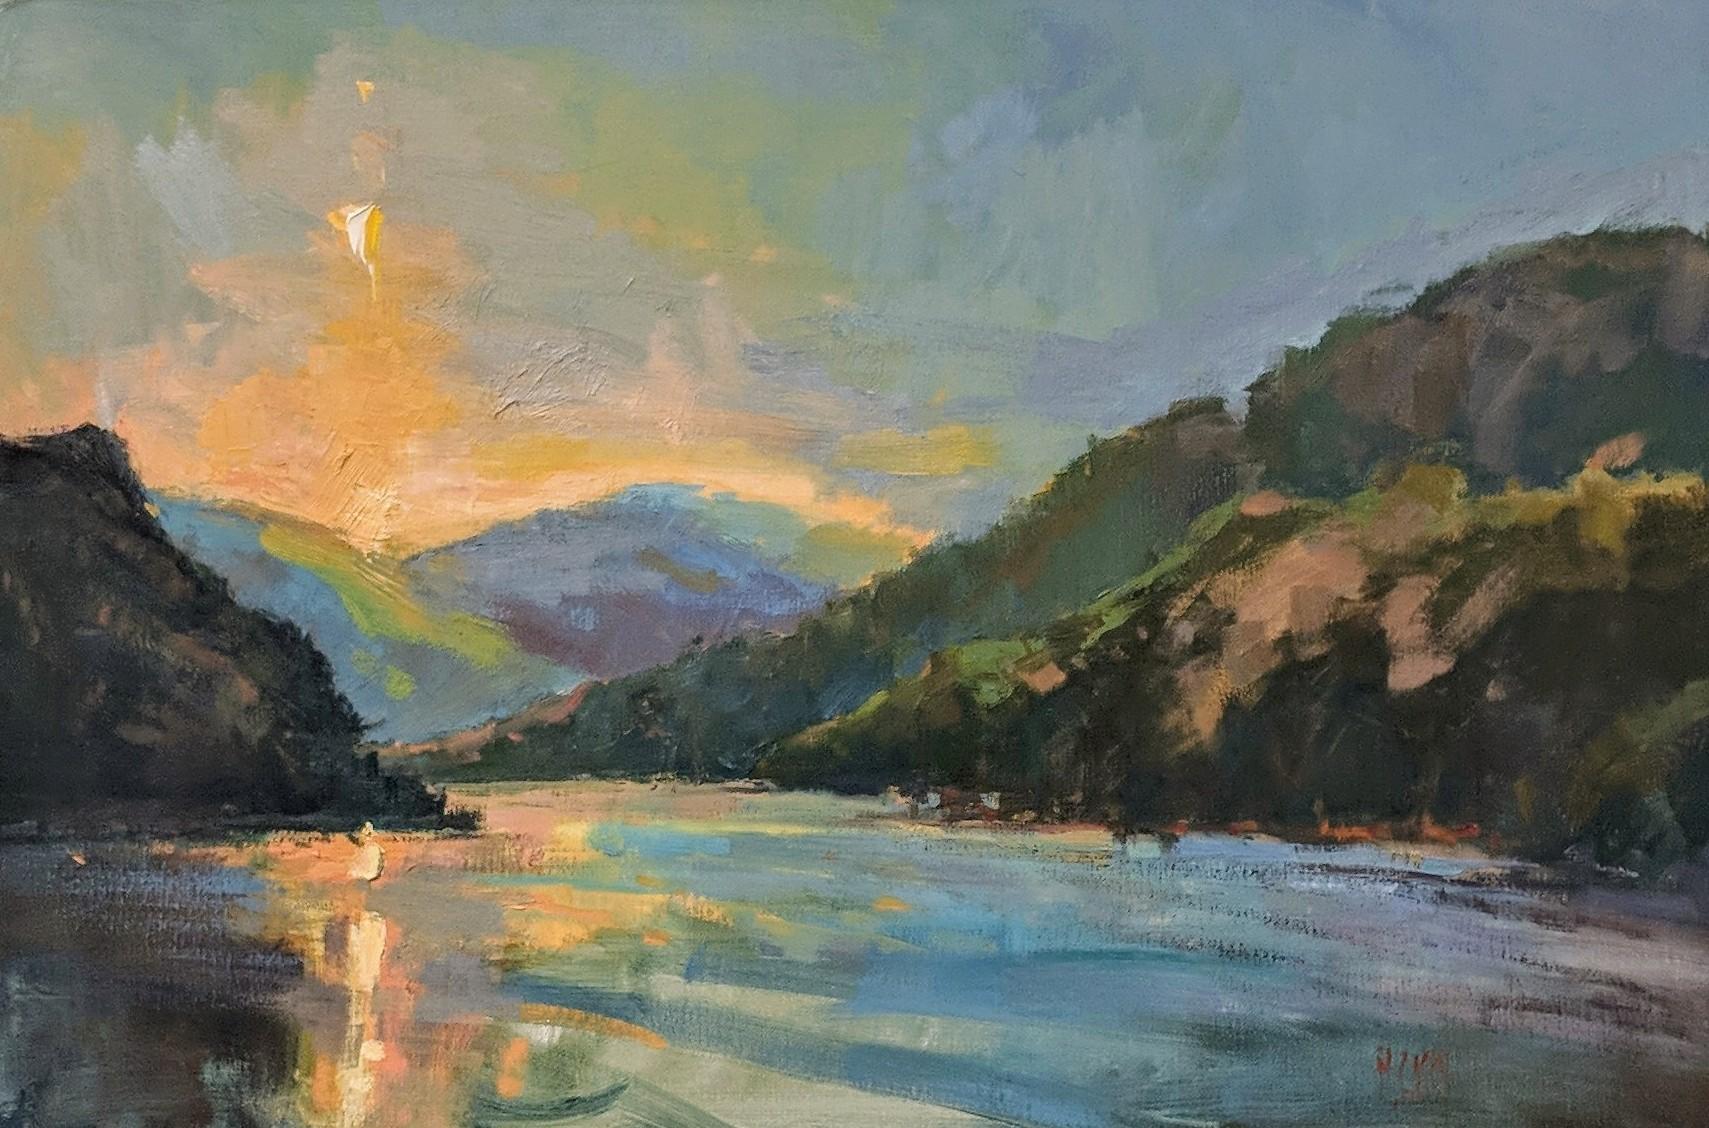 'Lakeside Sundown' is a framed Impressionist oil on canvas plein-air painting of horizontal format, created by American artist Millie Gosch in 2019. Featuring a palette mostly made of blue, orange, green and yellow tones, the painting depicts an